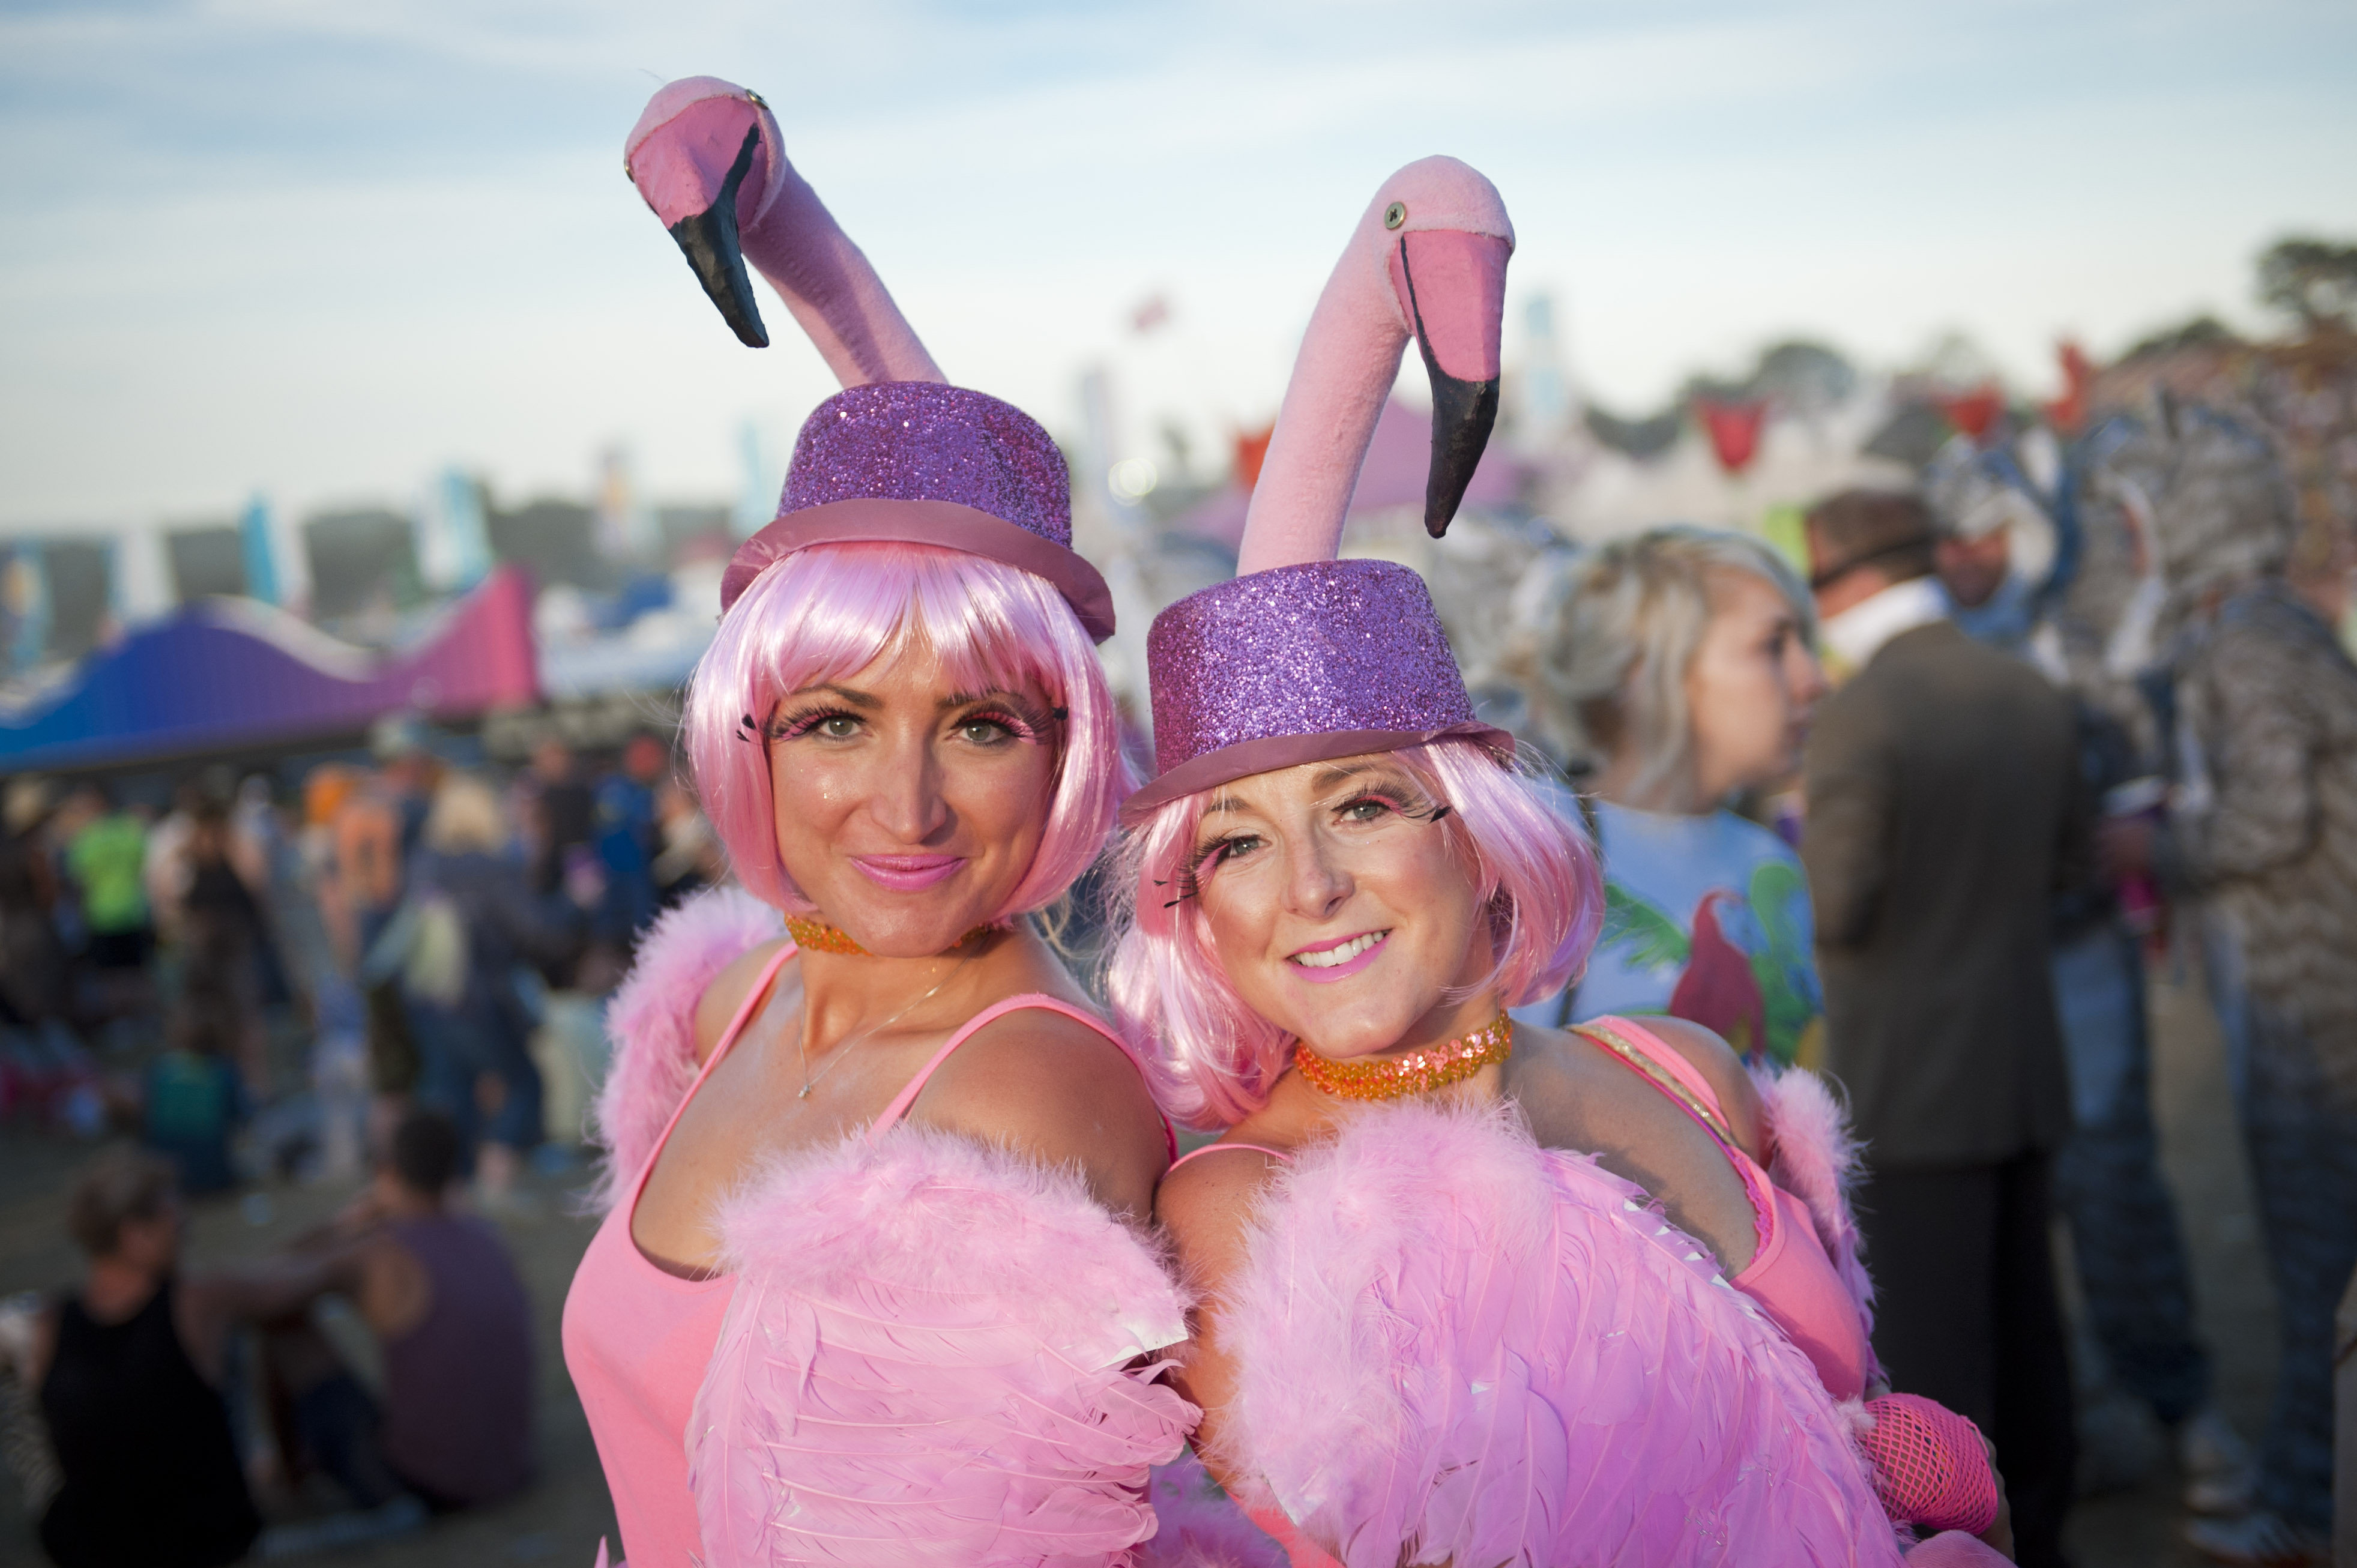 The Craziest List Of Fancy Dress Party Ideas For Adults - Plus top tips to  make your event a special one - FLAVOURMAG